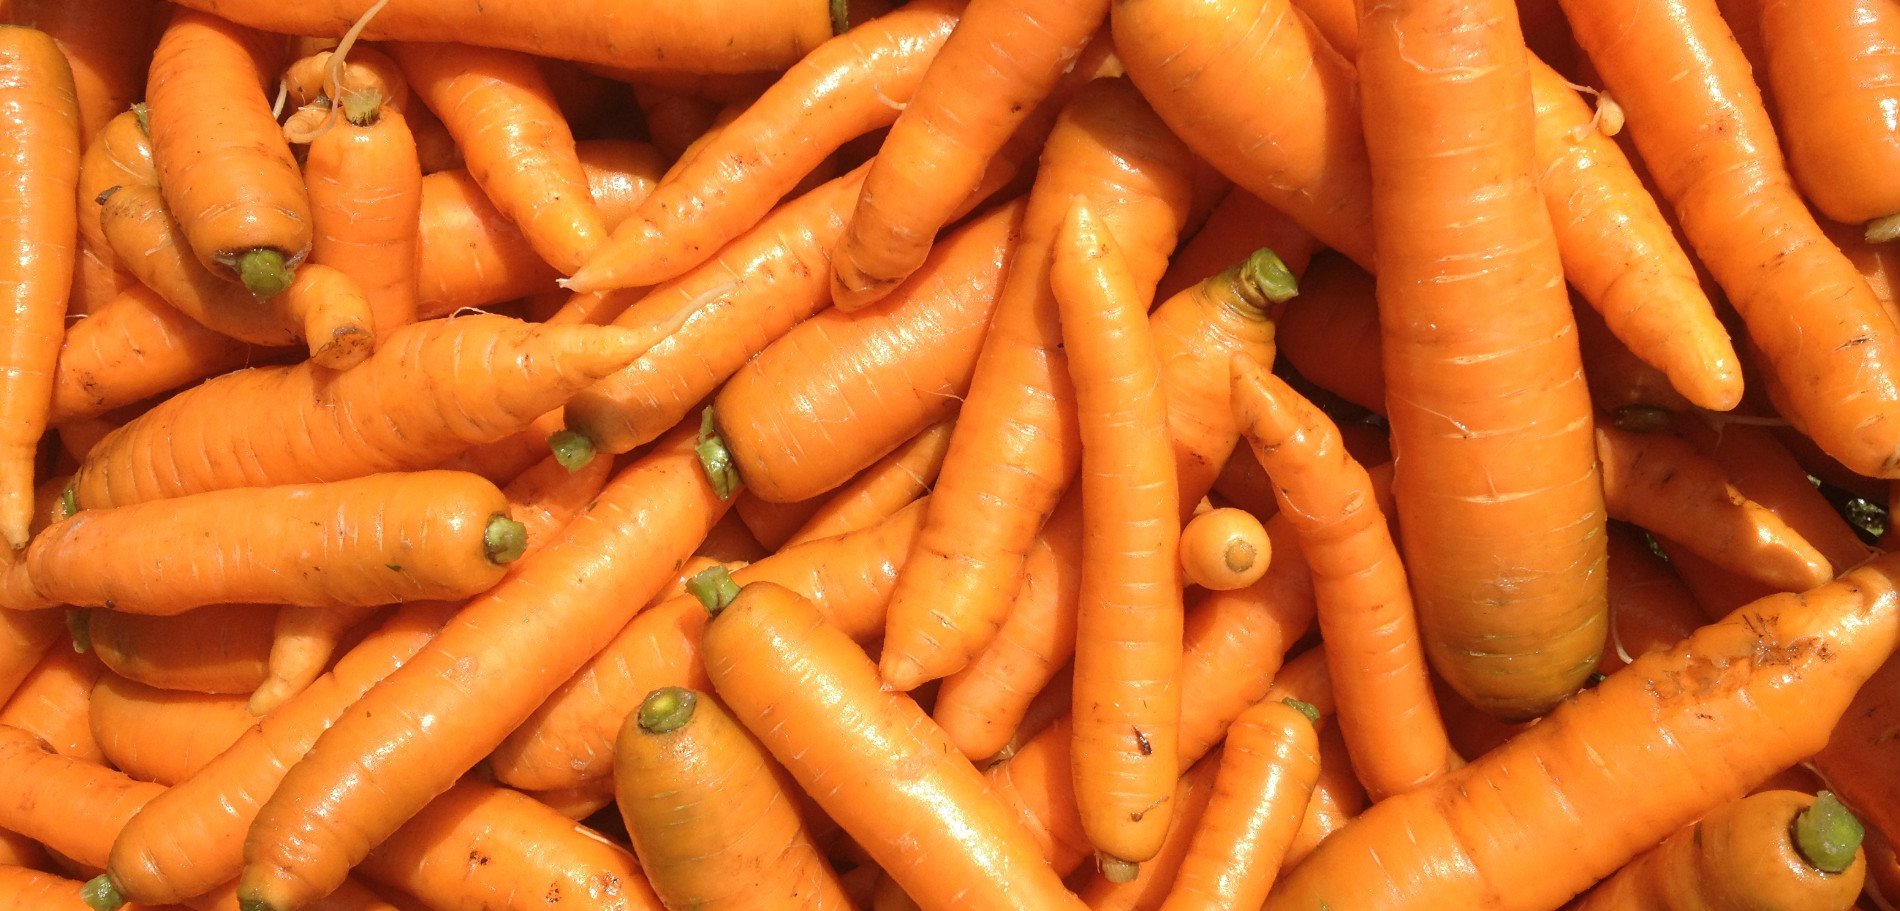 Next Happening: Late Season Share #4: Reindeer LOVE our Carrots!